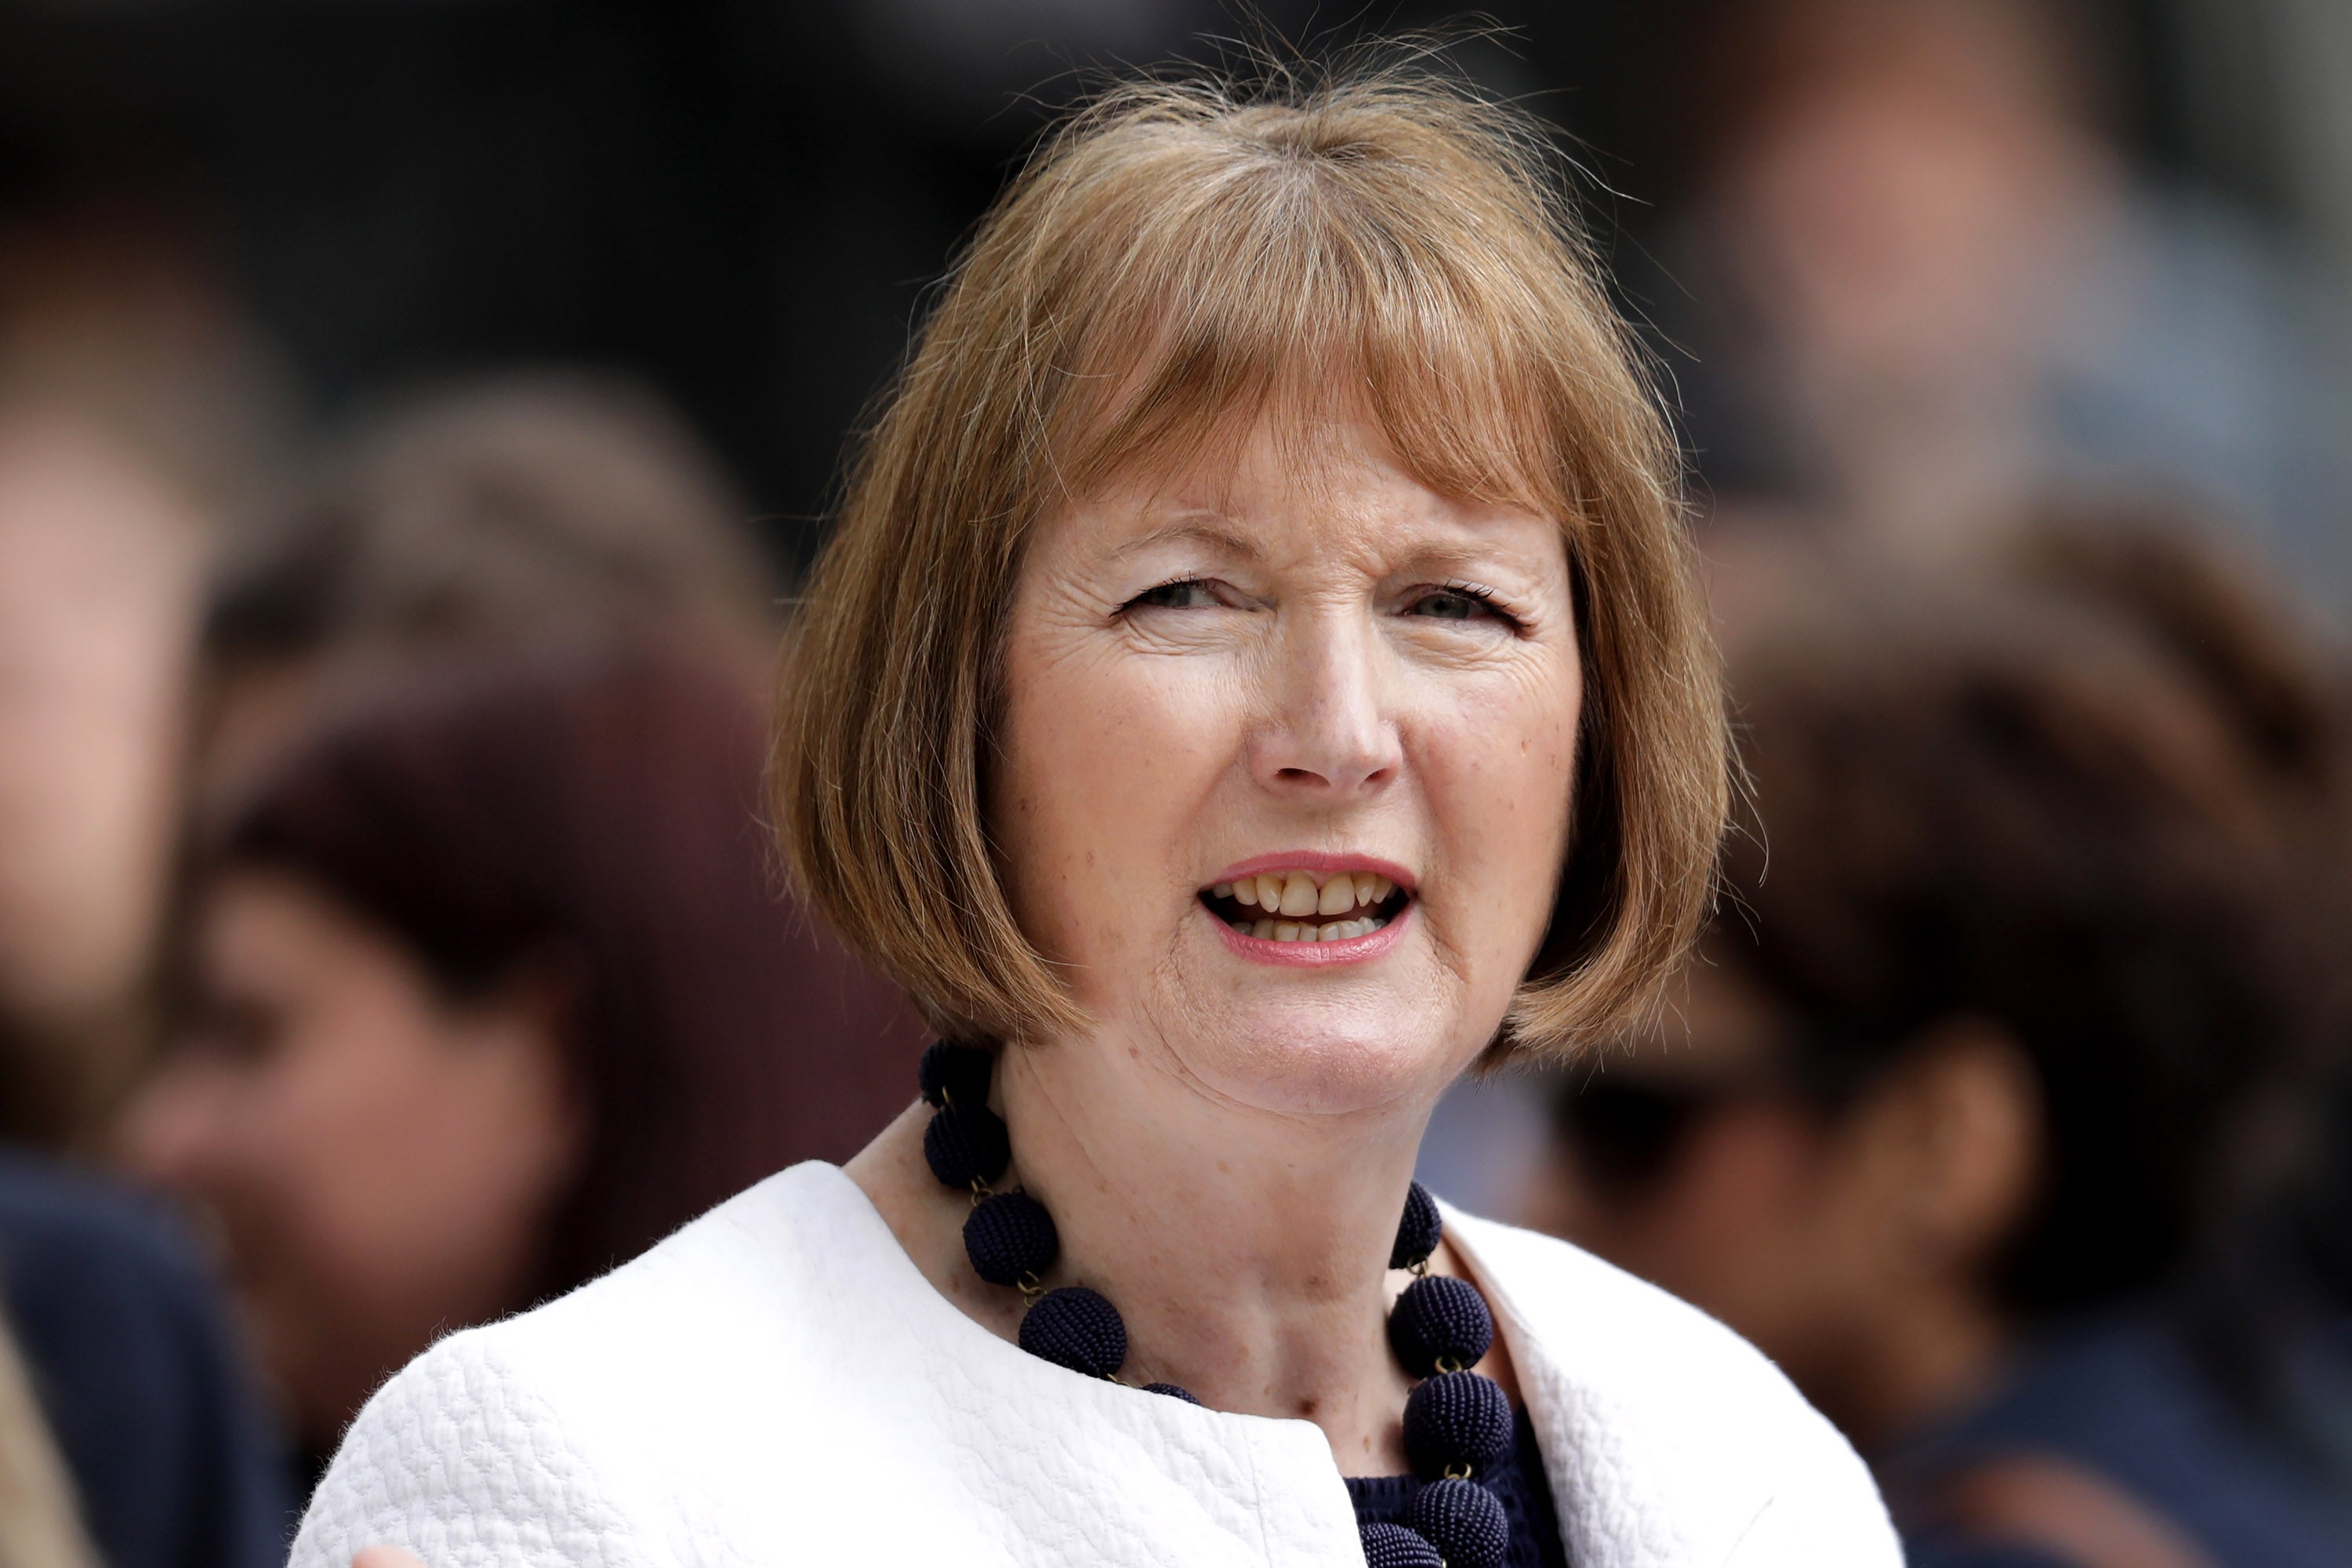 Labour MP Harriet Harman is chair of privileges committee